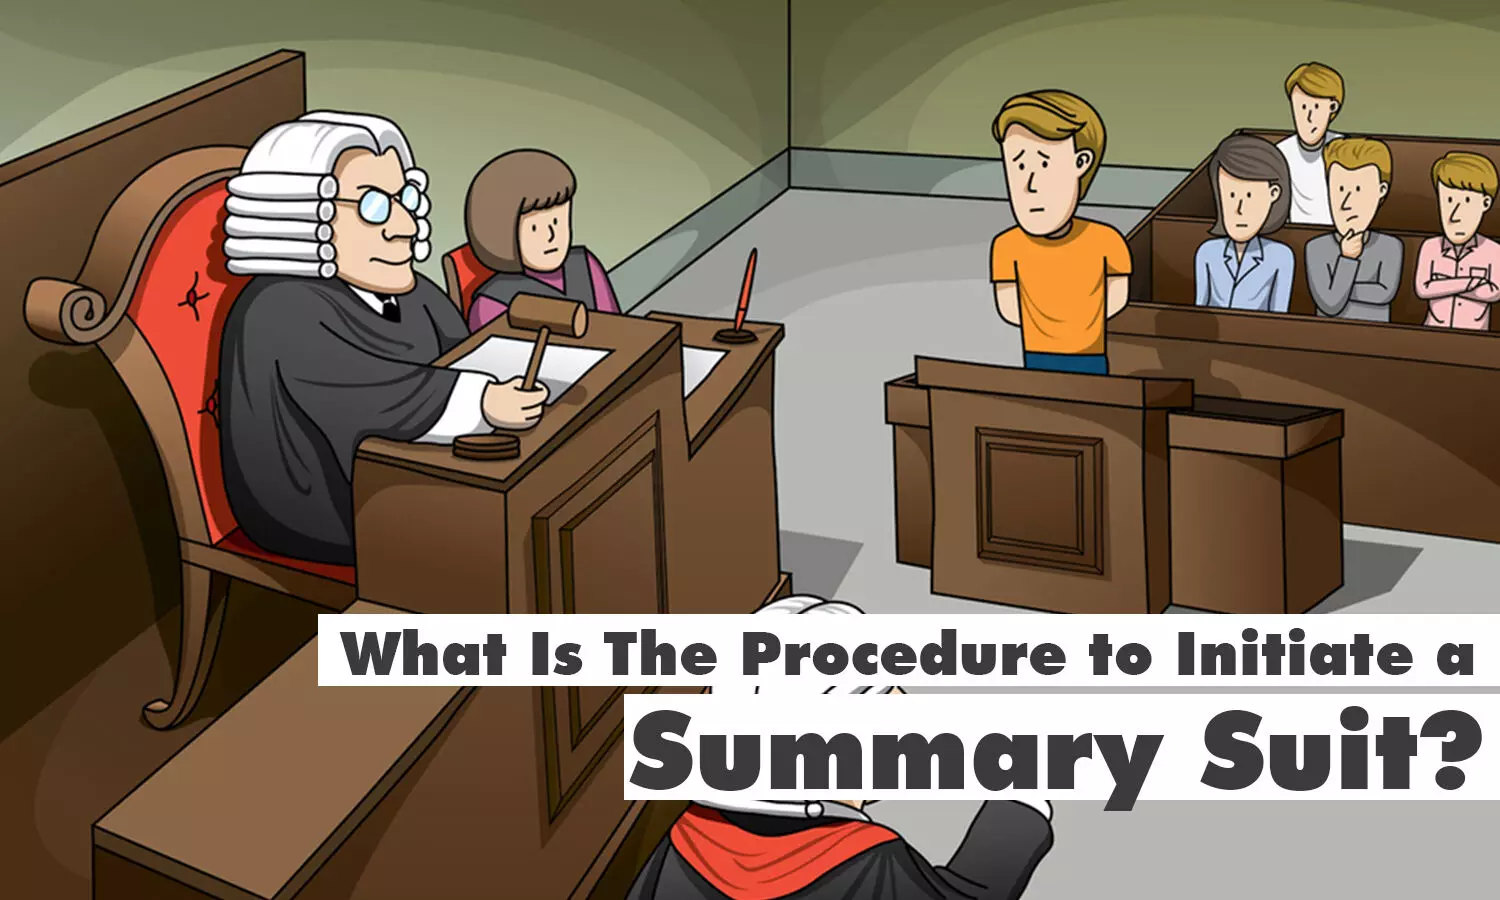 What Is The Procedure to Initiate a Summary Suit?